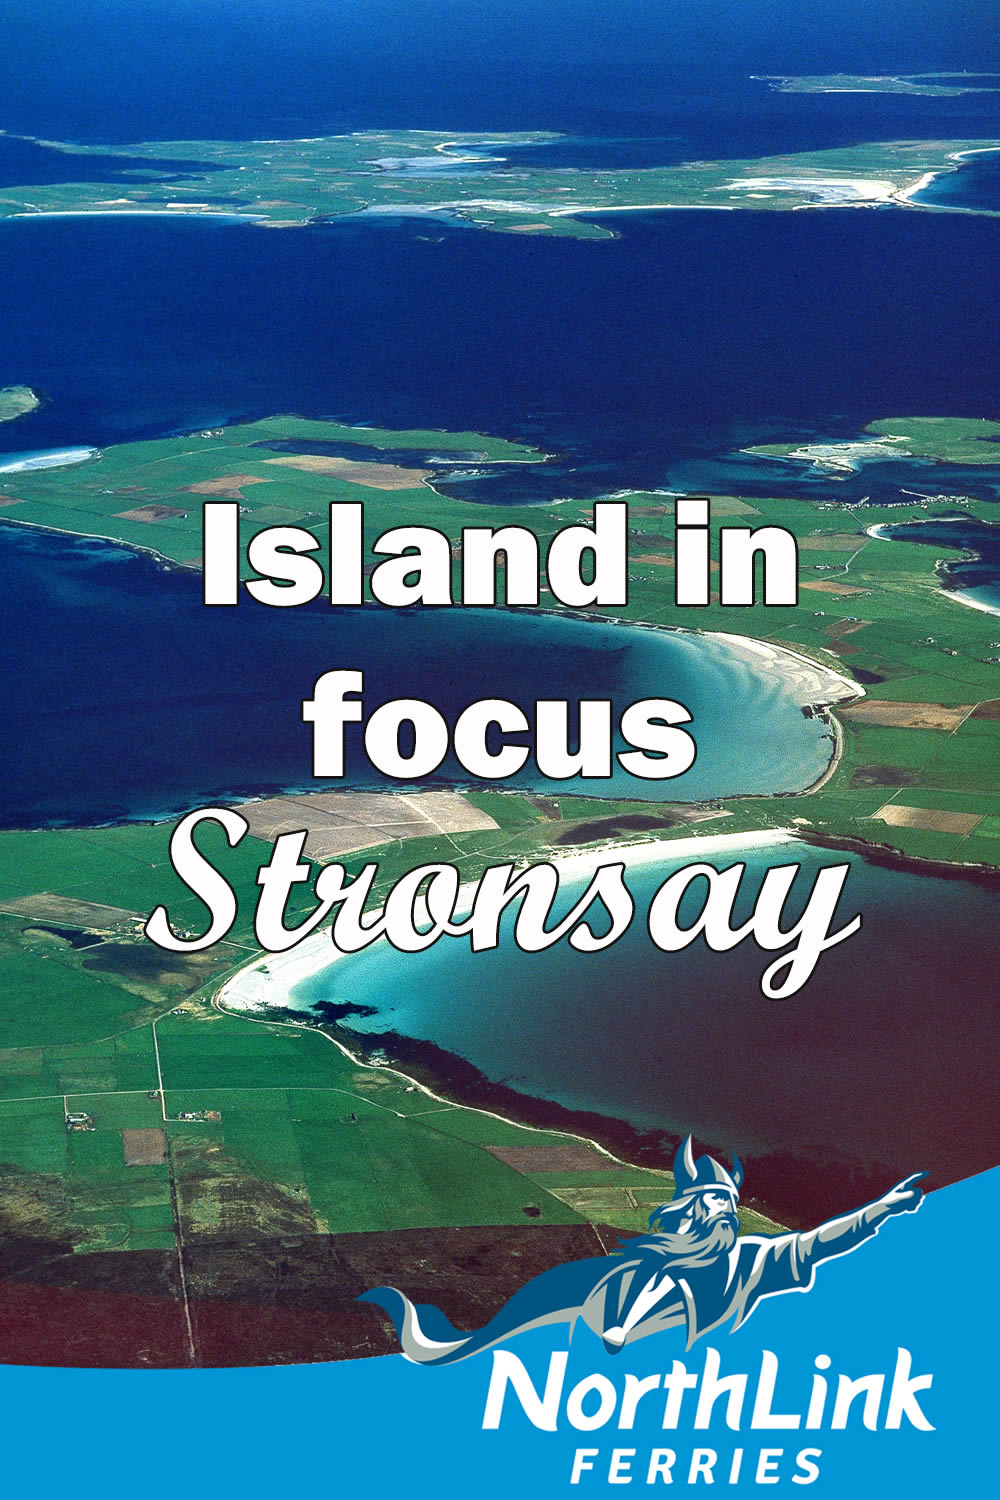 Island in Focus – Stronsay